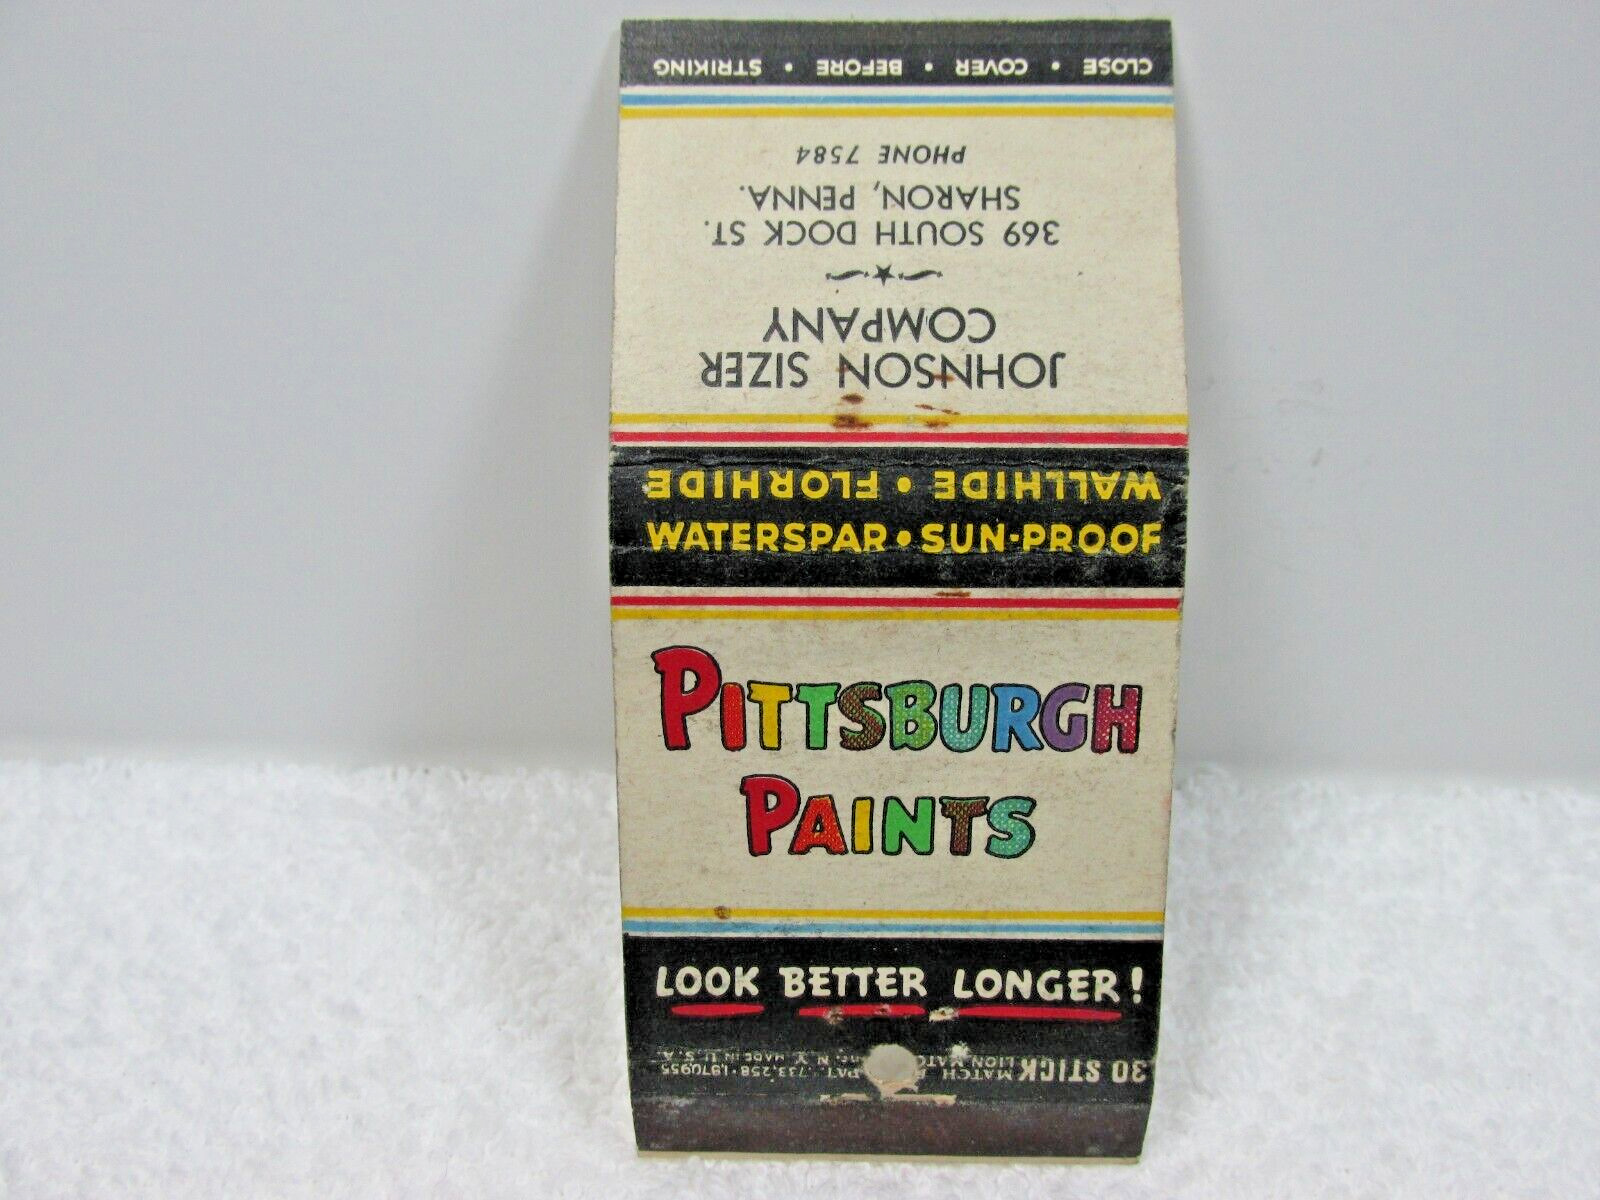 Vintage Pittsburg Paints Sharon PA Advertising Matchbook Cover